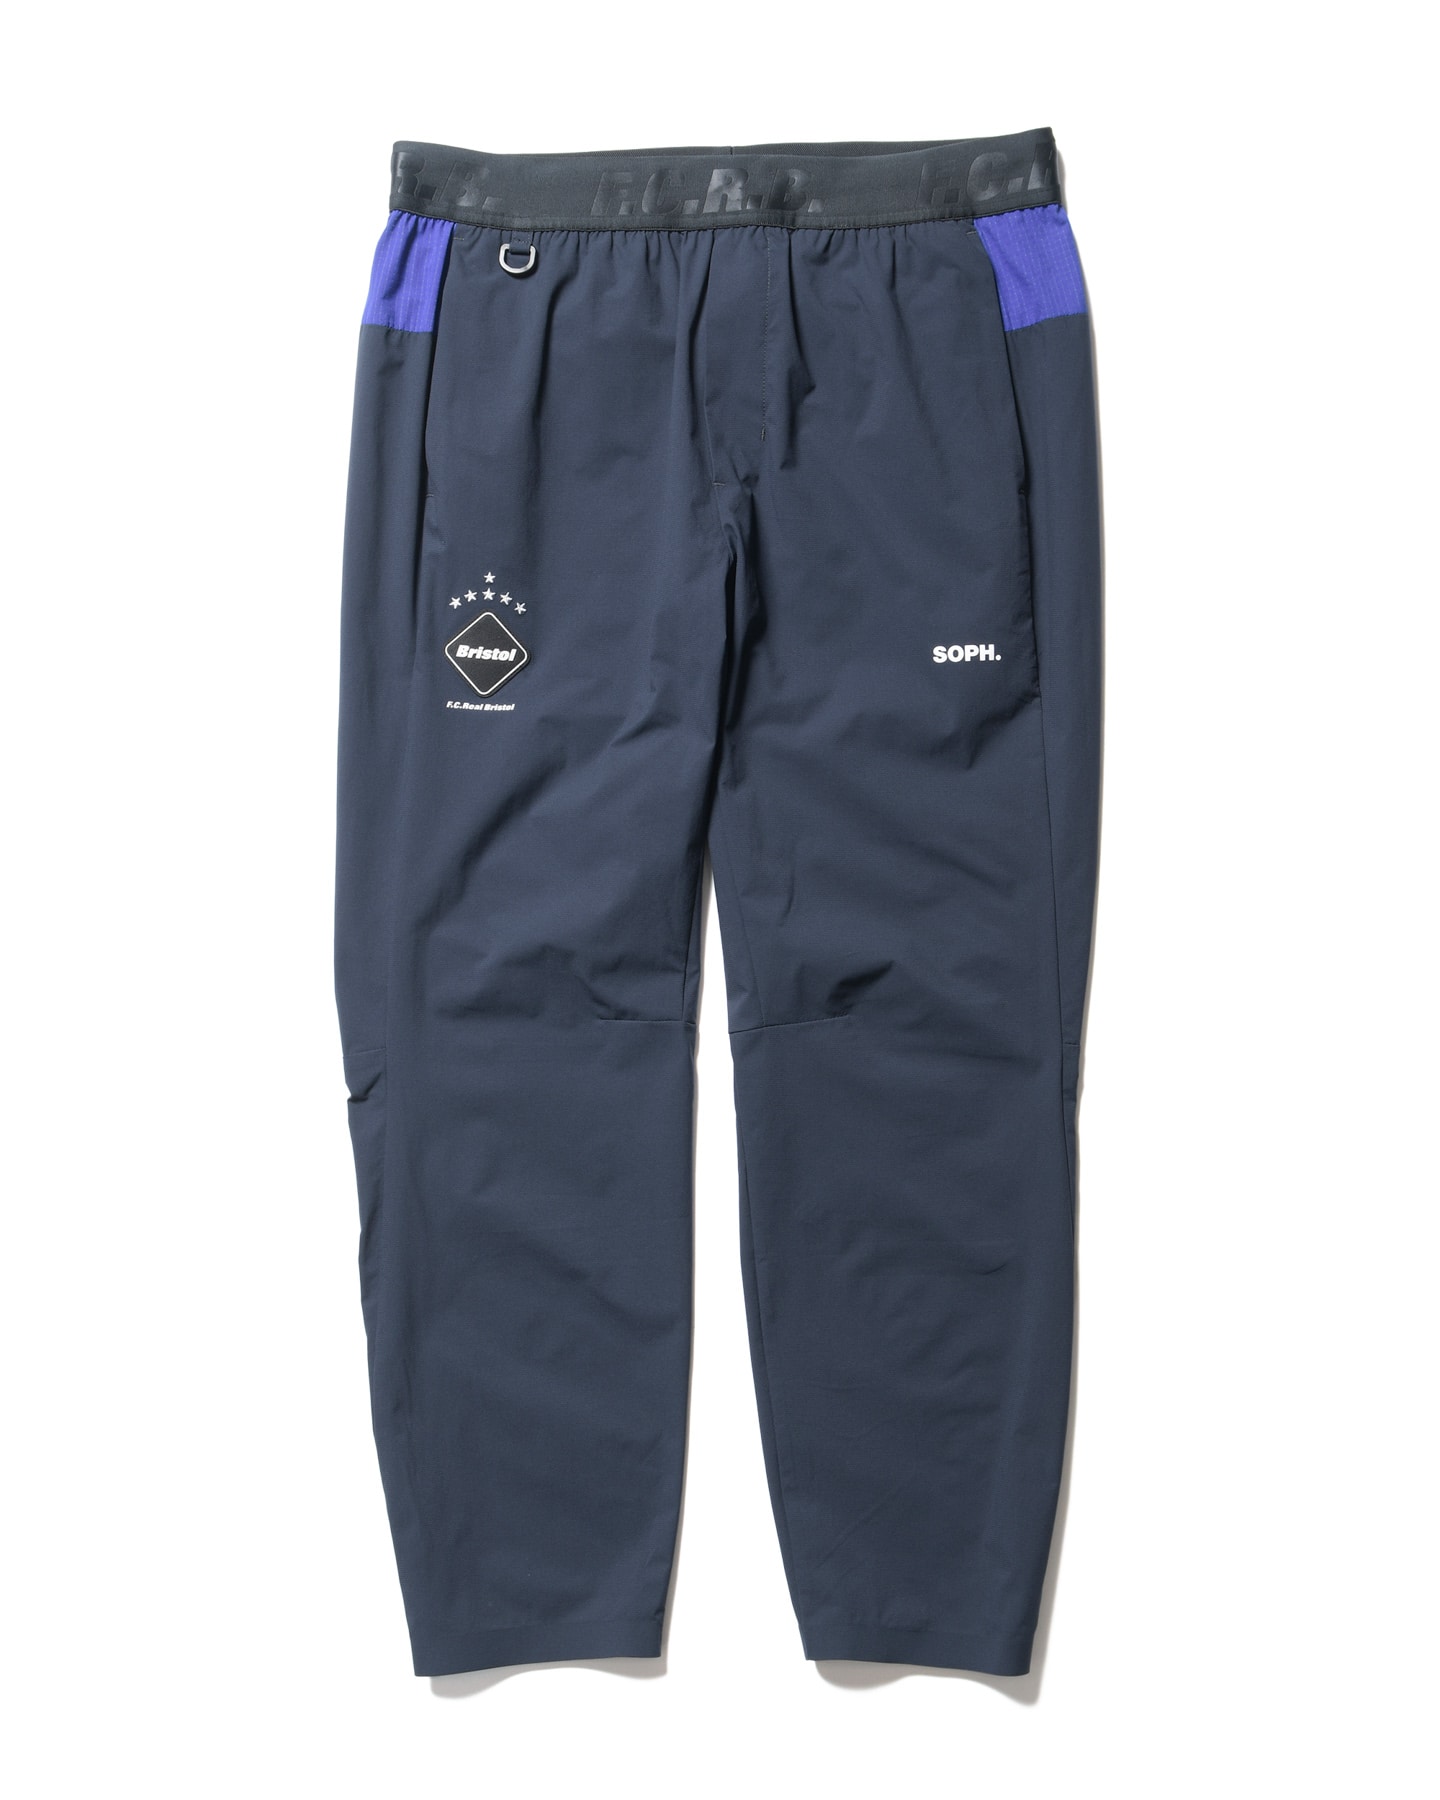 SOPH. | STRETCH LIGHT WEIGHT EASY TAPERED PANTS(M NAVY):